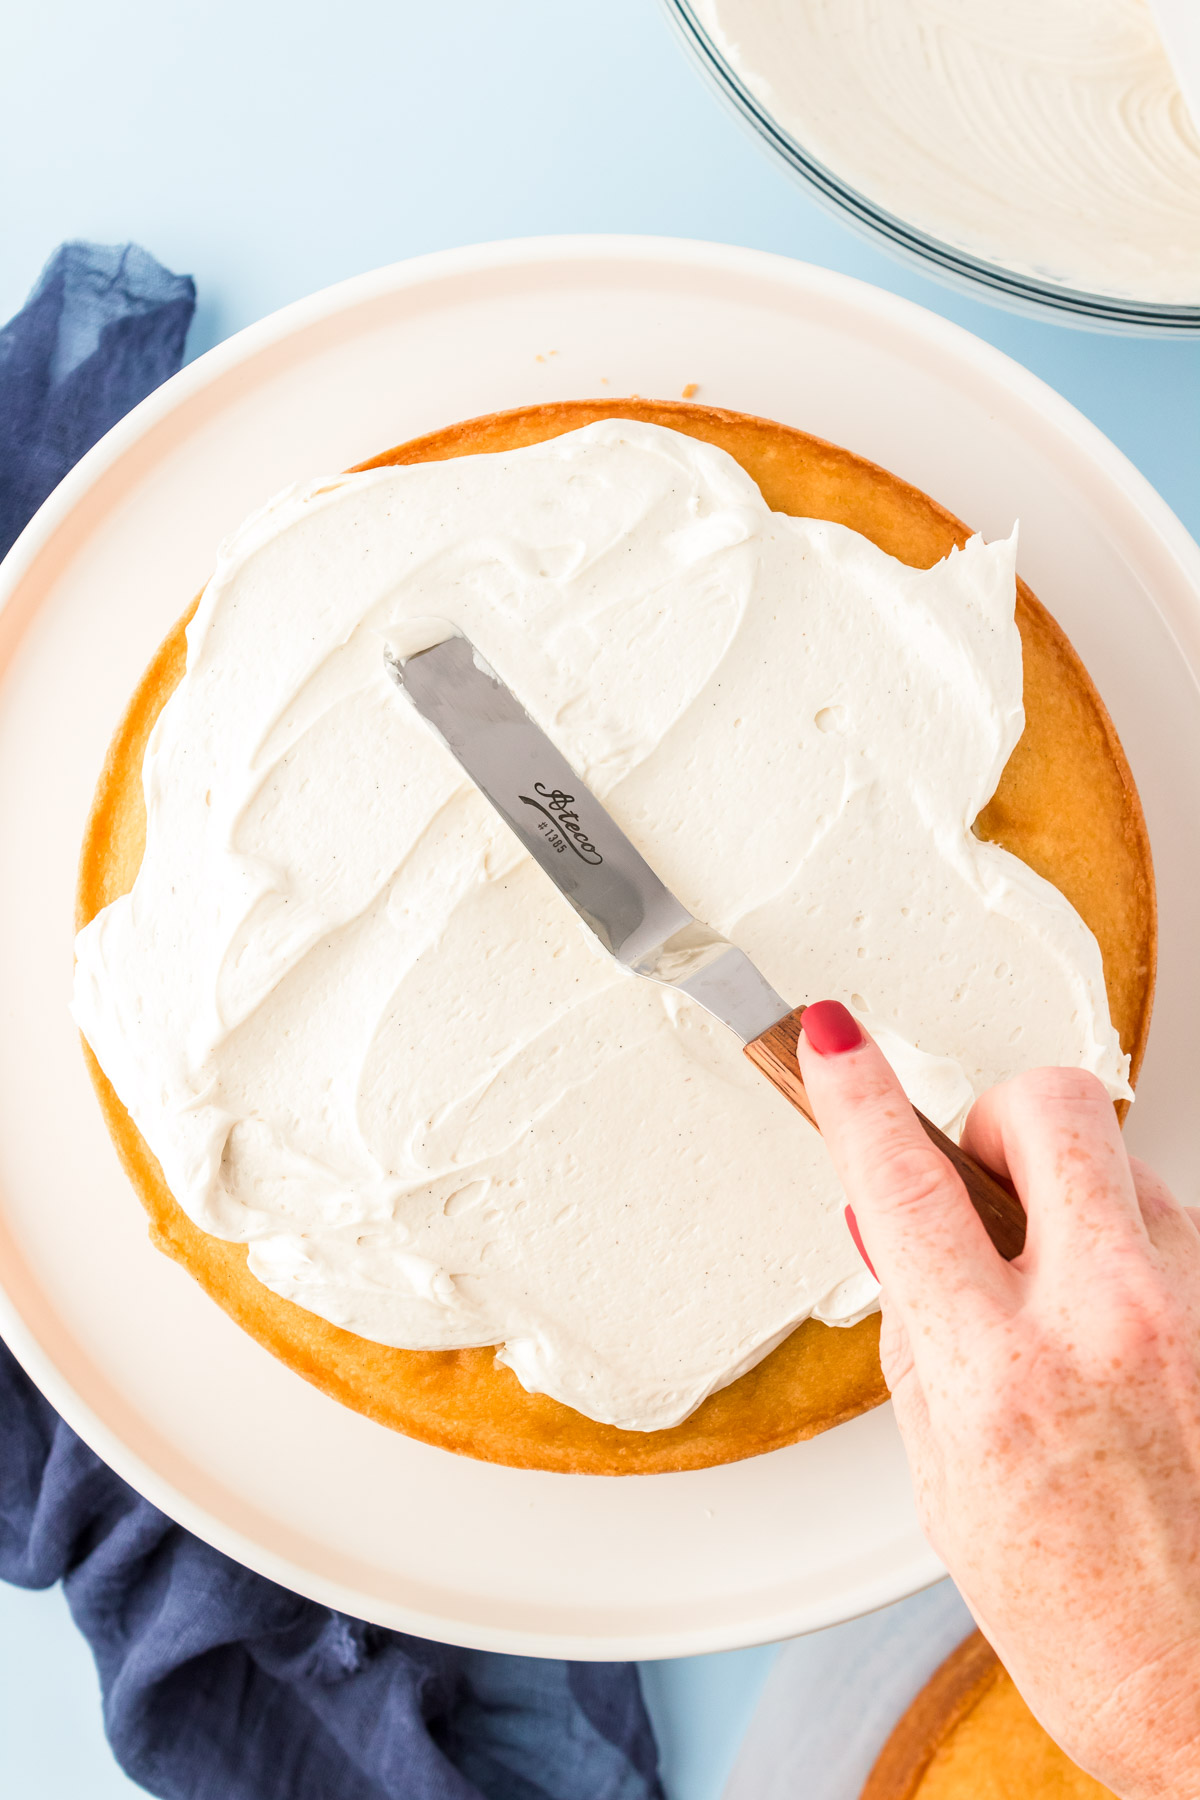 A woman's hand holding an offset spatula to spread frosting over a cake.